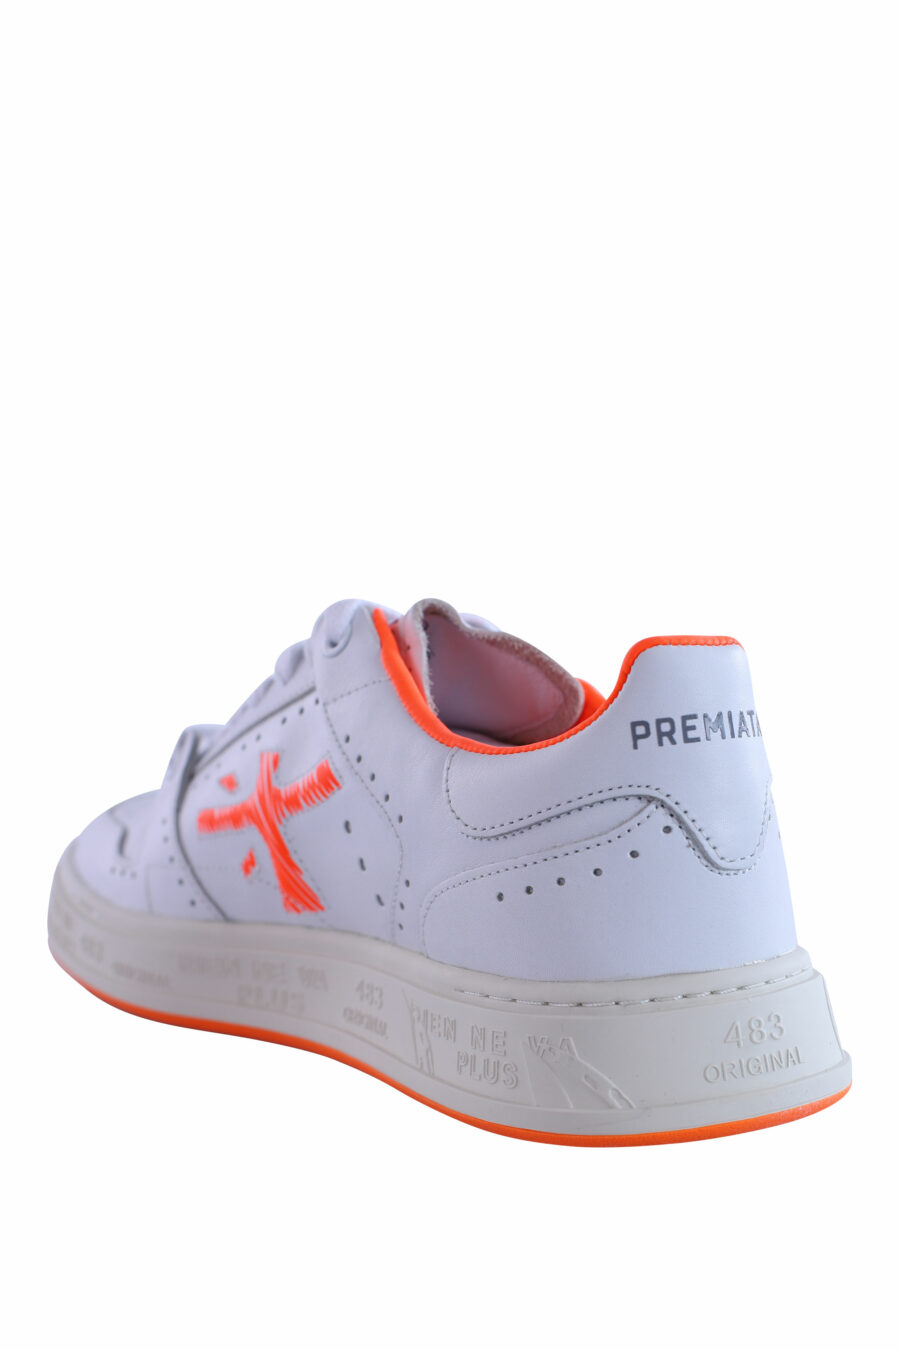 White trainers with orange "quinn 6302" - IMG 2996